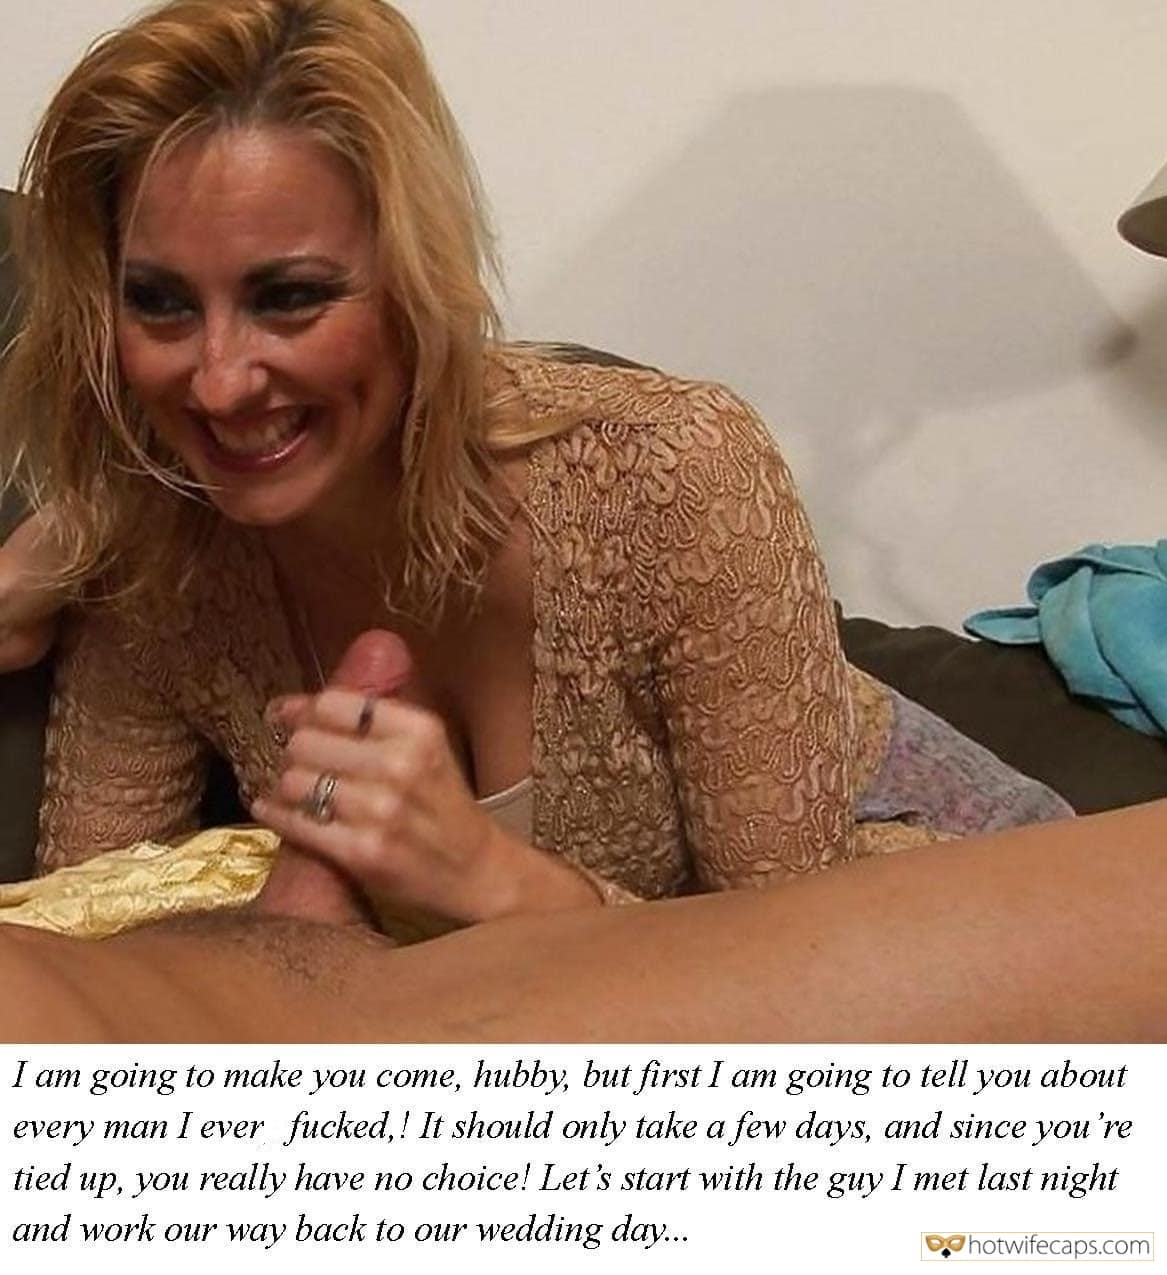 Handjob Dirty Talk hotwife caption: I am going to make you come, hubby, but first I am going to tell you about every man I ever fucked,! It should only take a few days, and since you’re tied up, you really have no choice! Let’s...